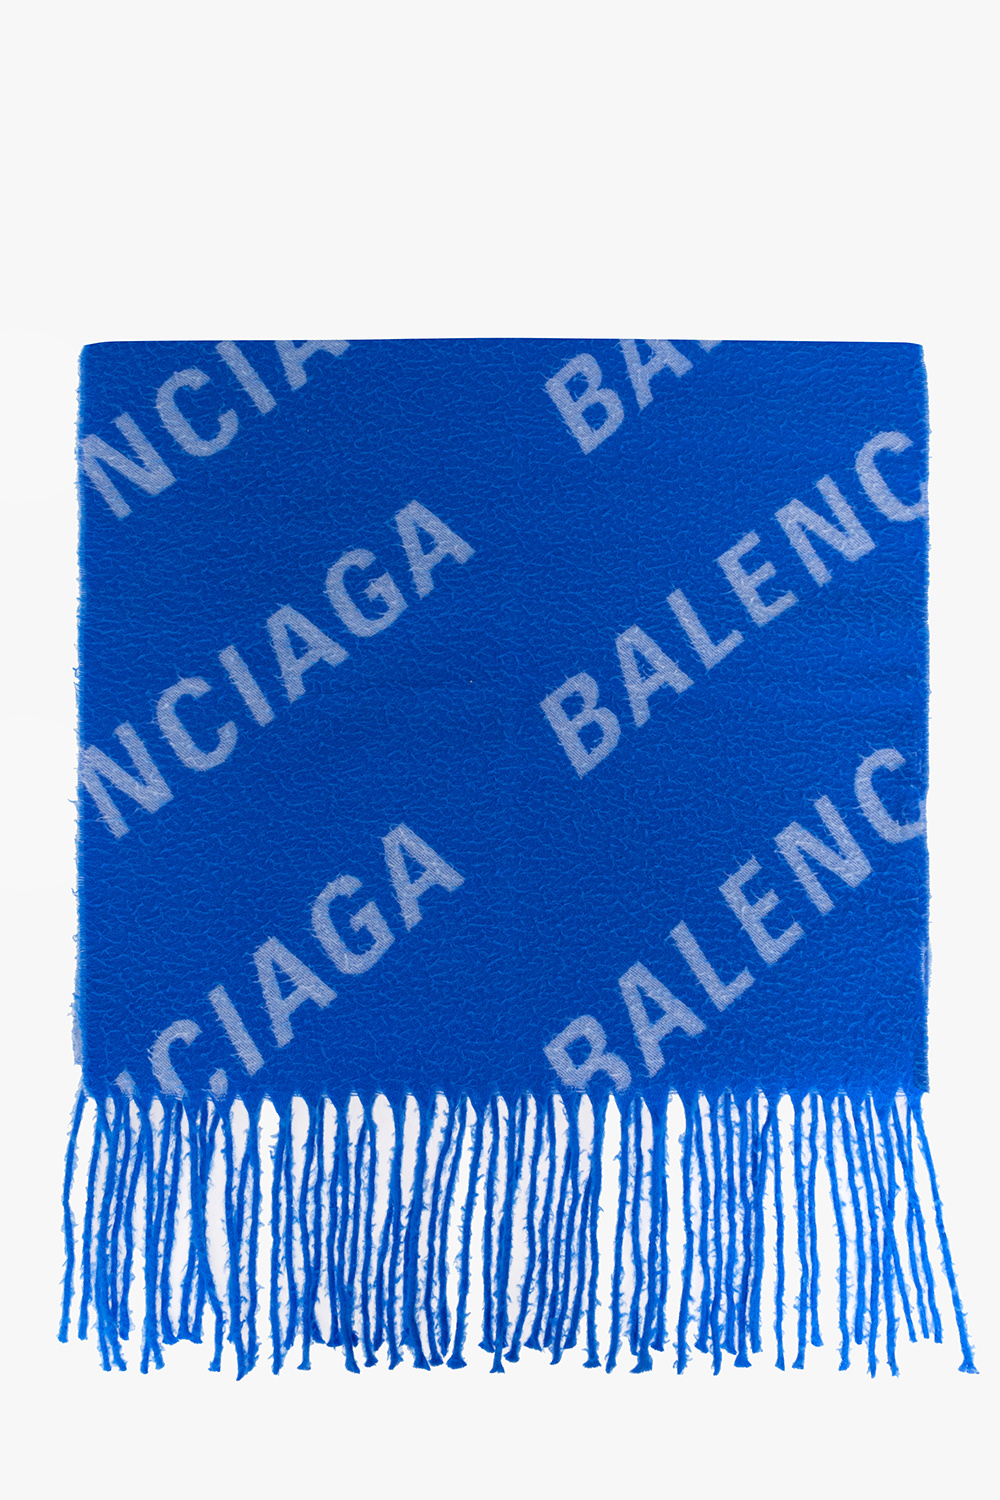 Balenciaga PERFECT GIFTS FOR IMPERFECT MOMS